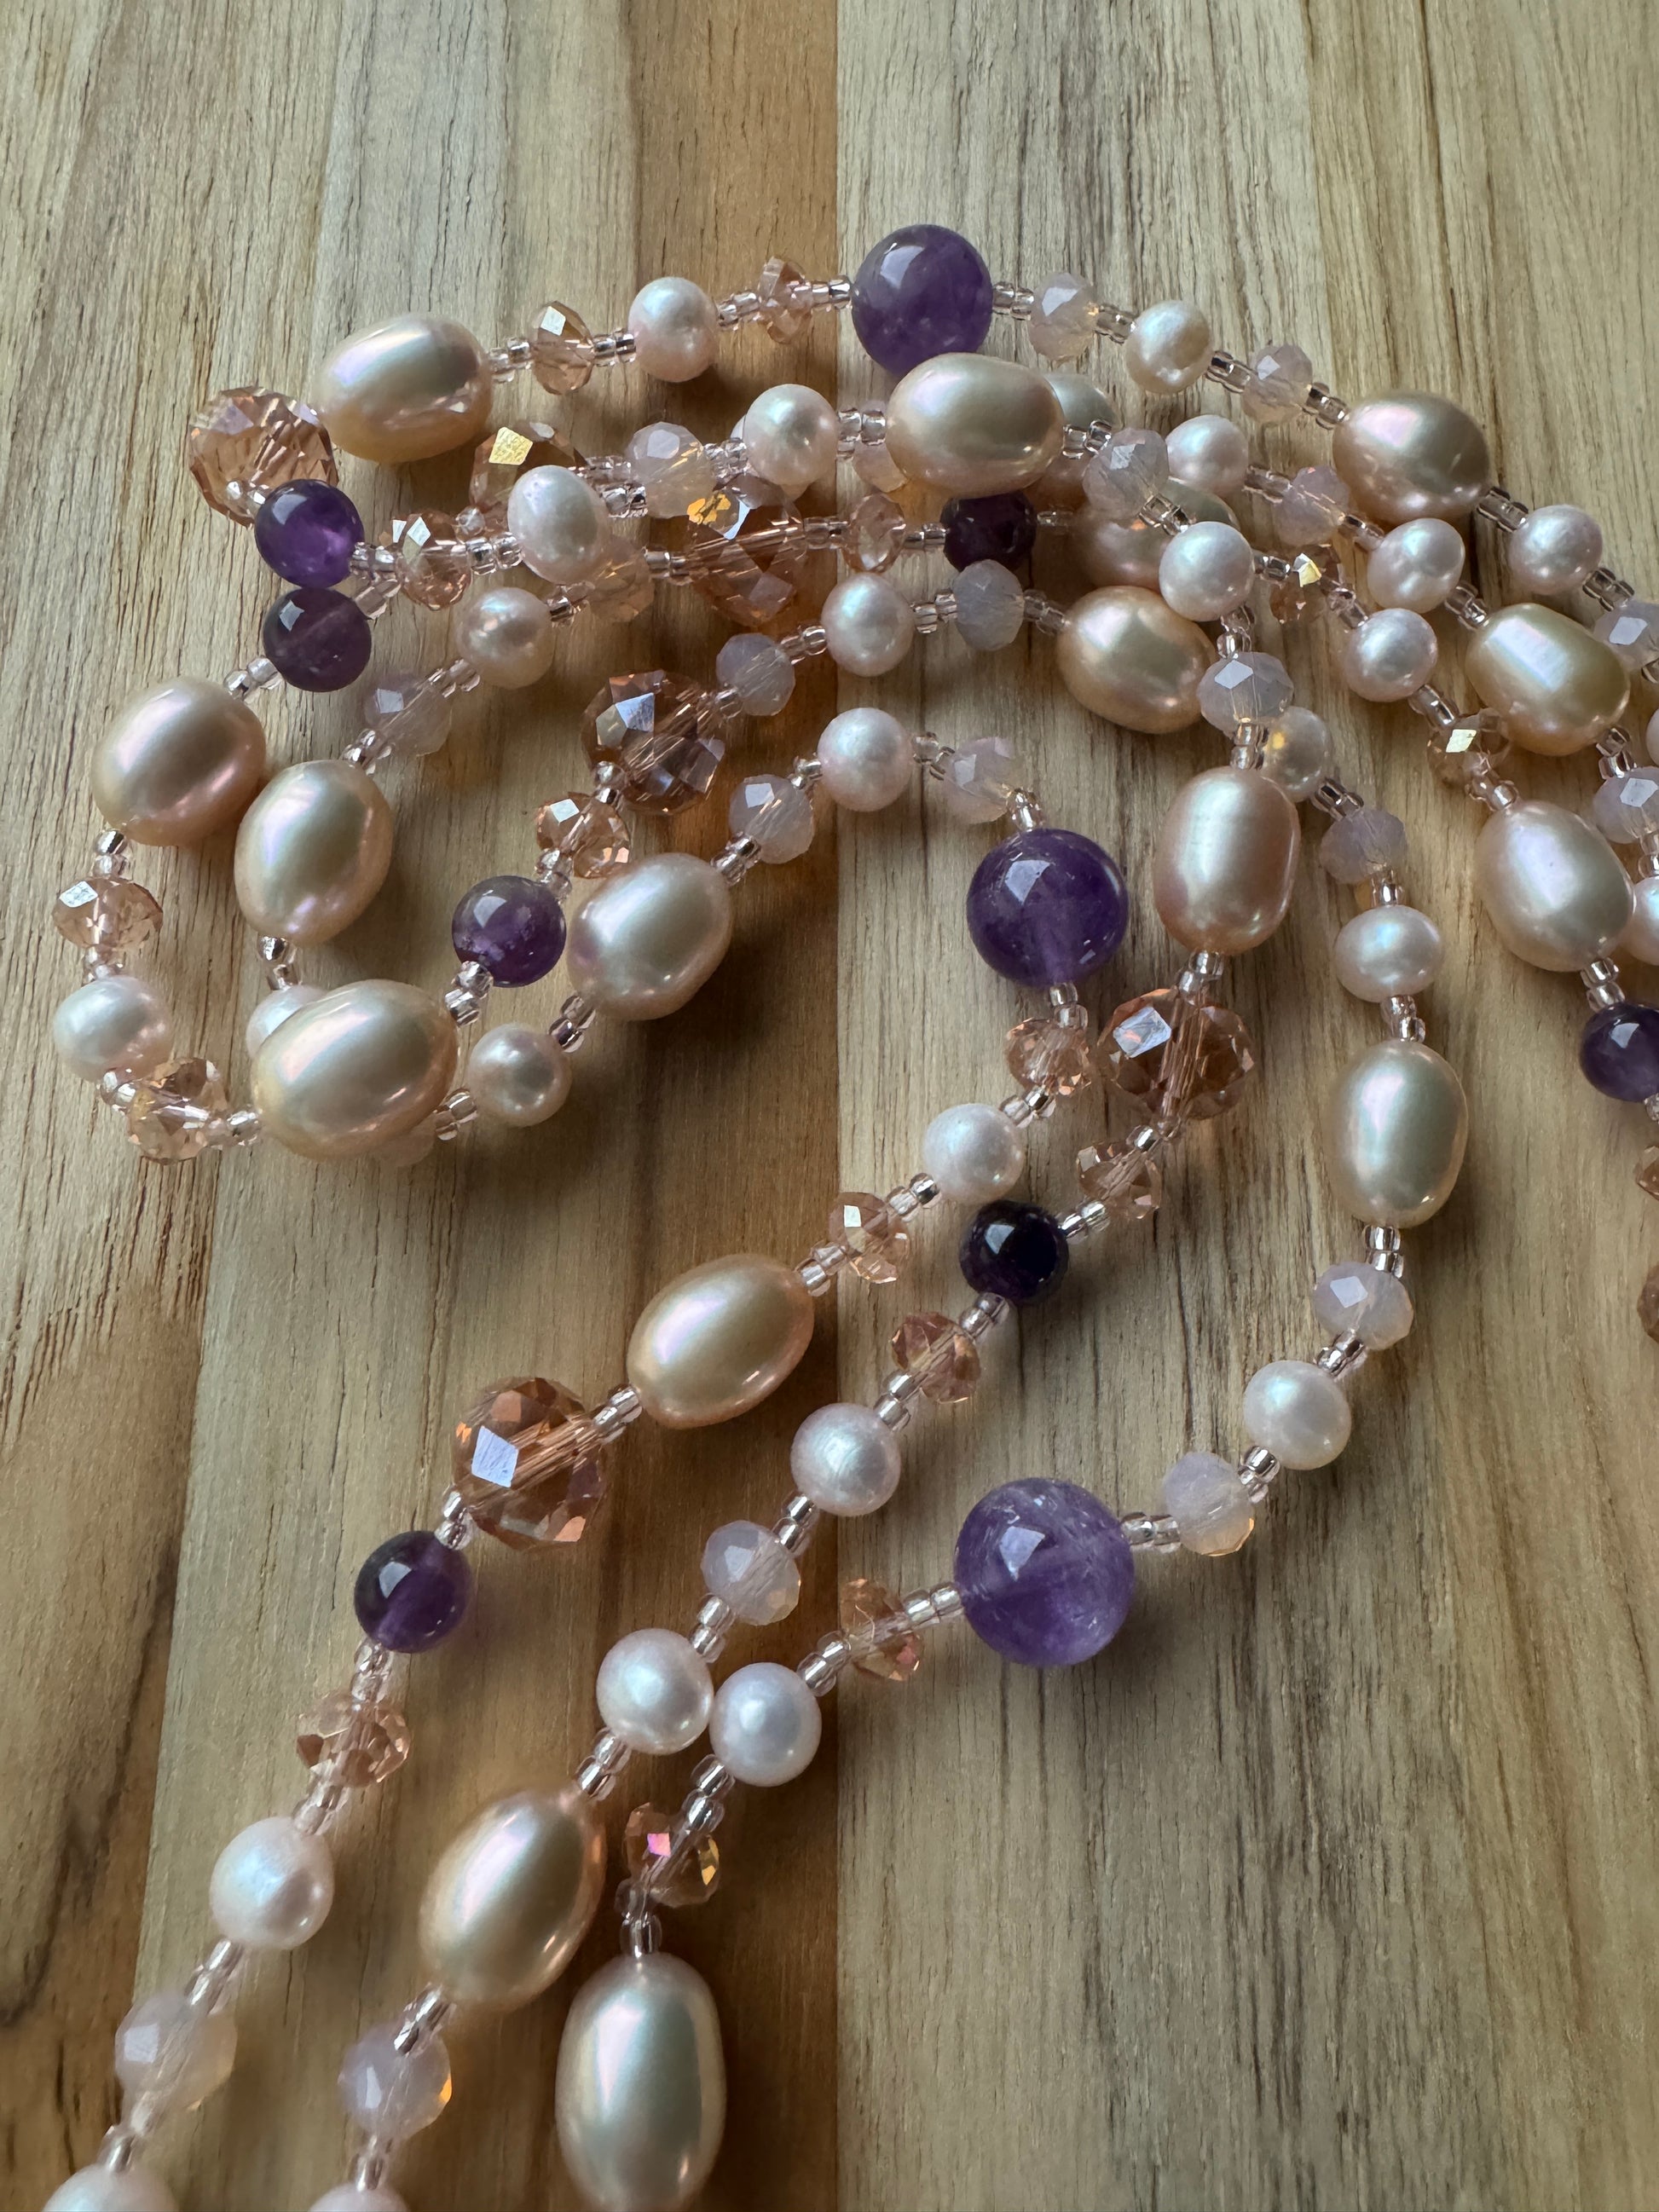 60" Extra Long Ballet Slipper Pink Freshwater Pearl Beaded Necklace with Amethyst and Crystal Beads - My Urban Gems